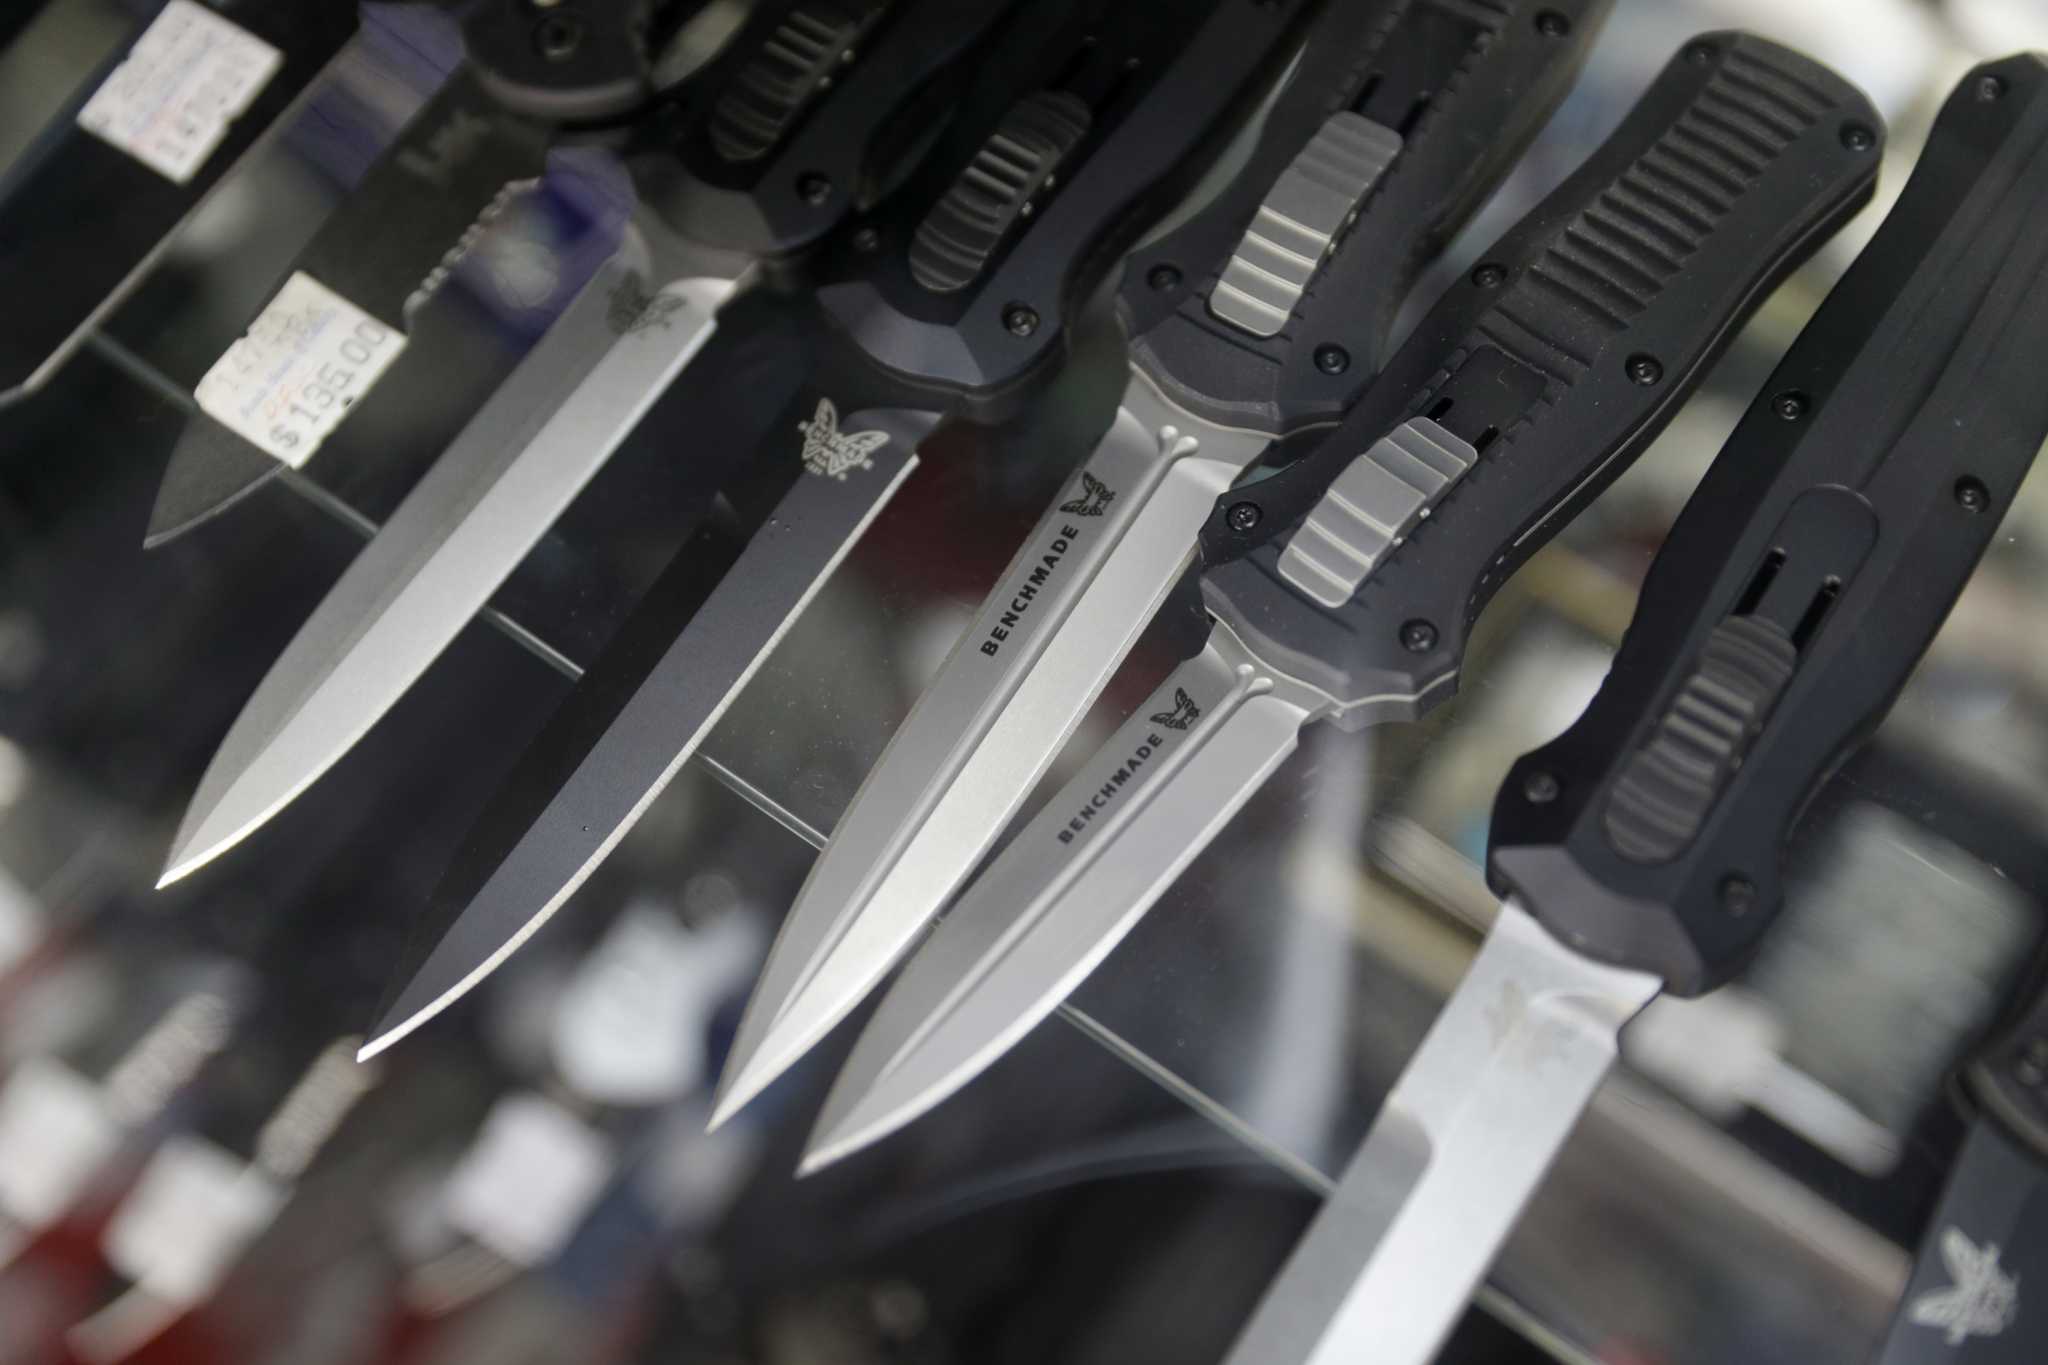 9th Circuit overturns Hawaii butterfly knife ban, citing Supreme